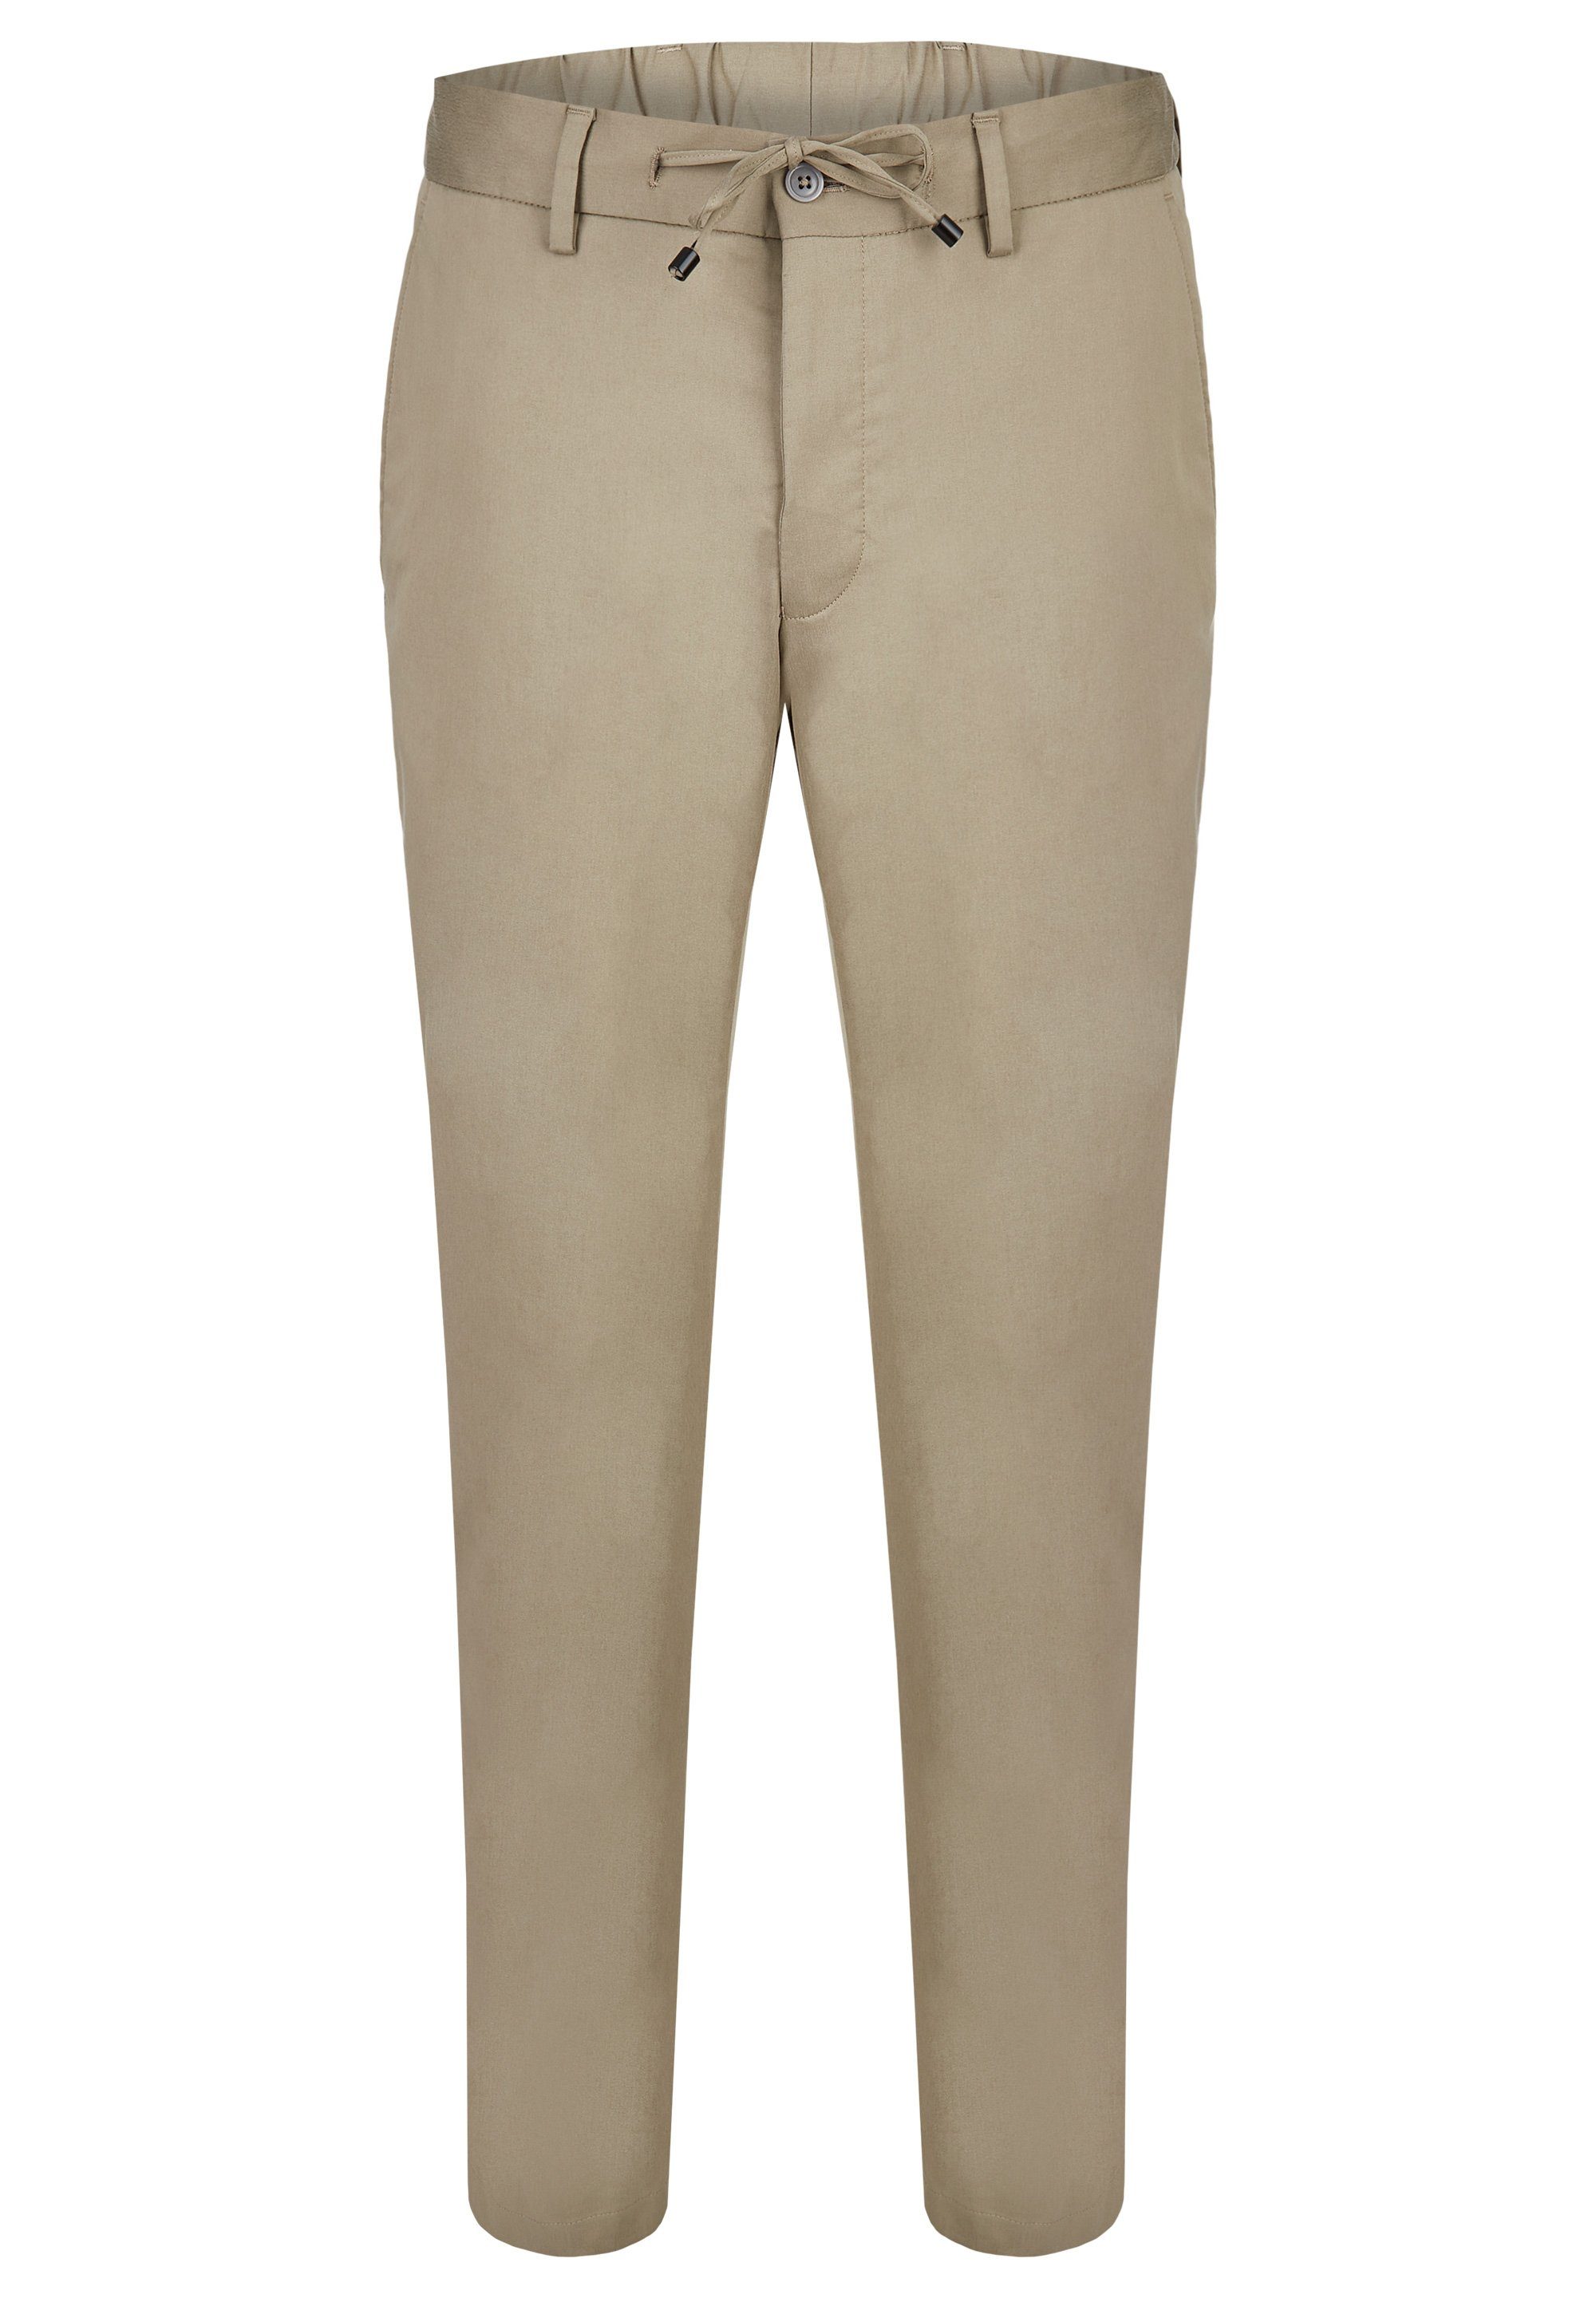 HECHTER PARIS Stoffhose Trousers Allrounders Komfortstretch sand